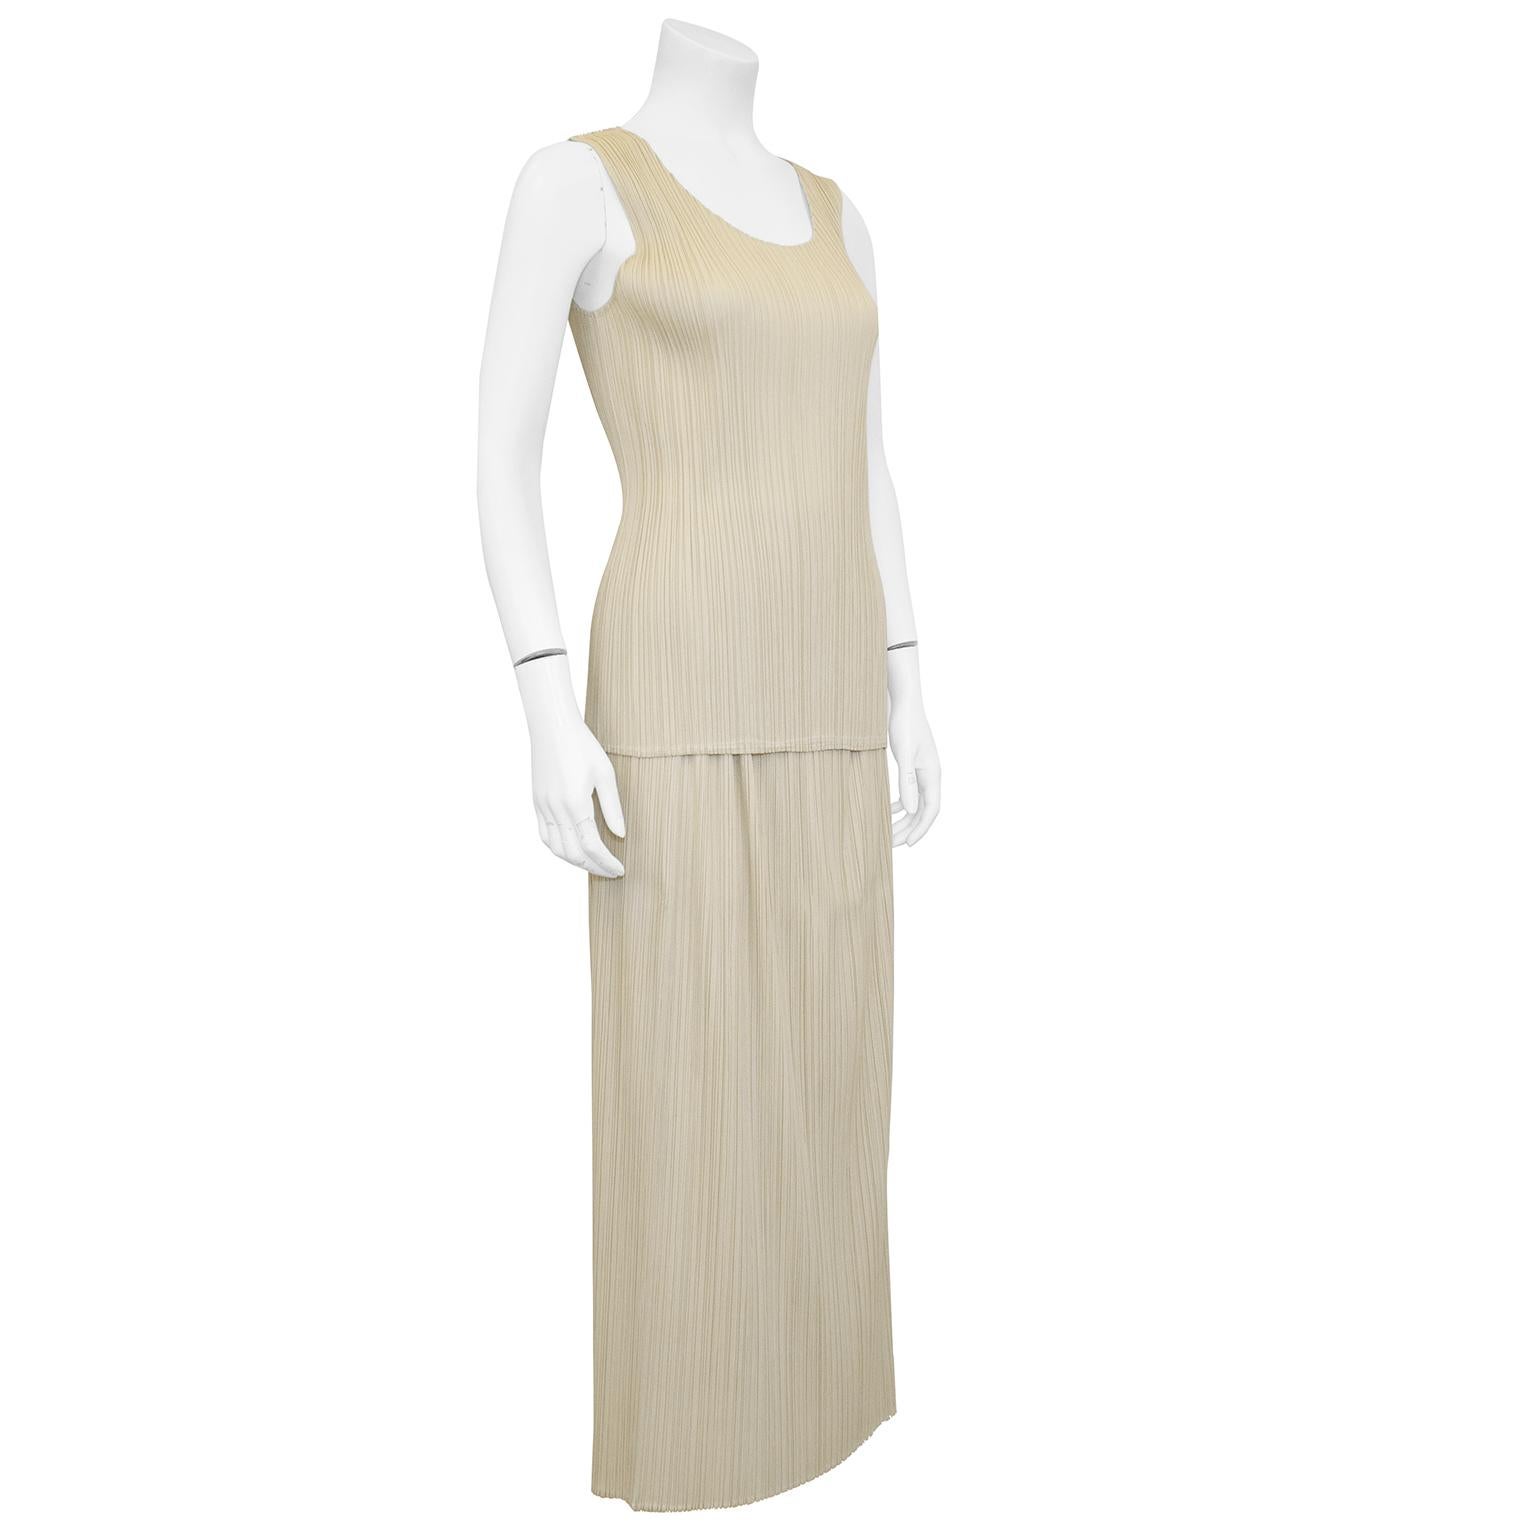 Issey Miyake cream ensemble from the 1990s. Sleeveless scoop neck top and midi length pencil skirt in the classic Issey Miyake micro pleating. Excellent vintage condition. Size small. Made in Japan. Great for travelling as these pieces do not